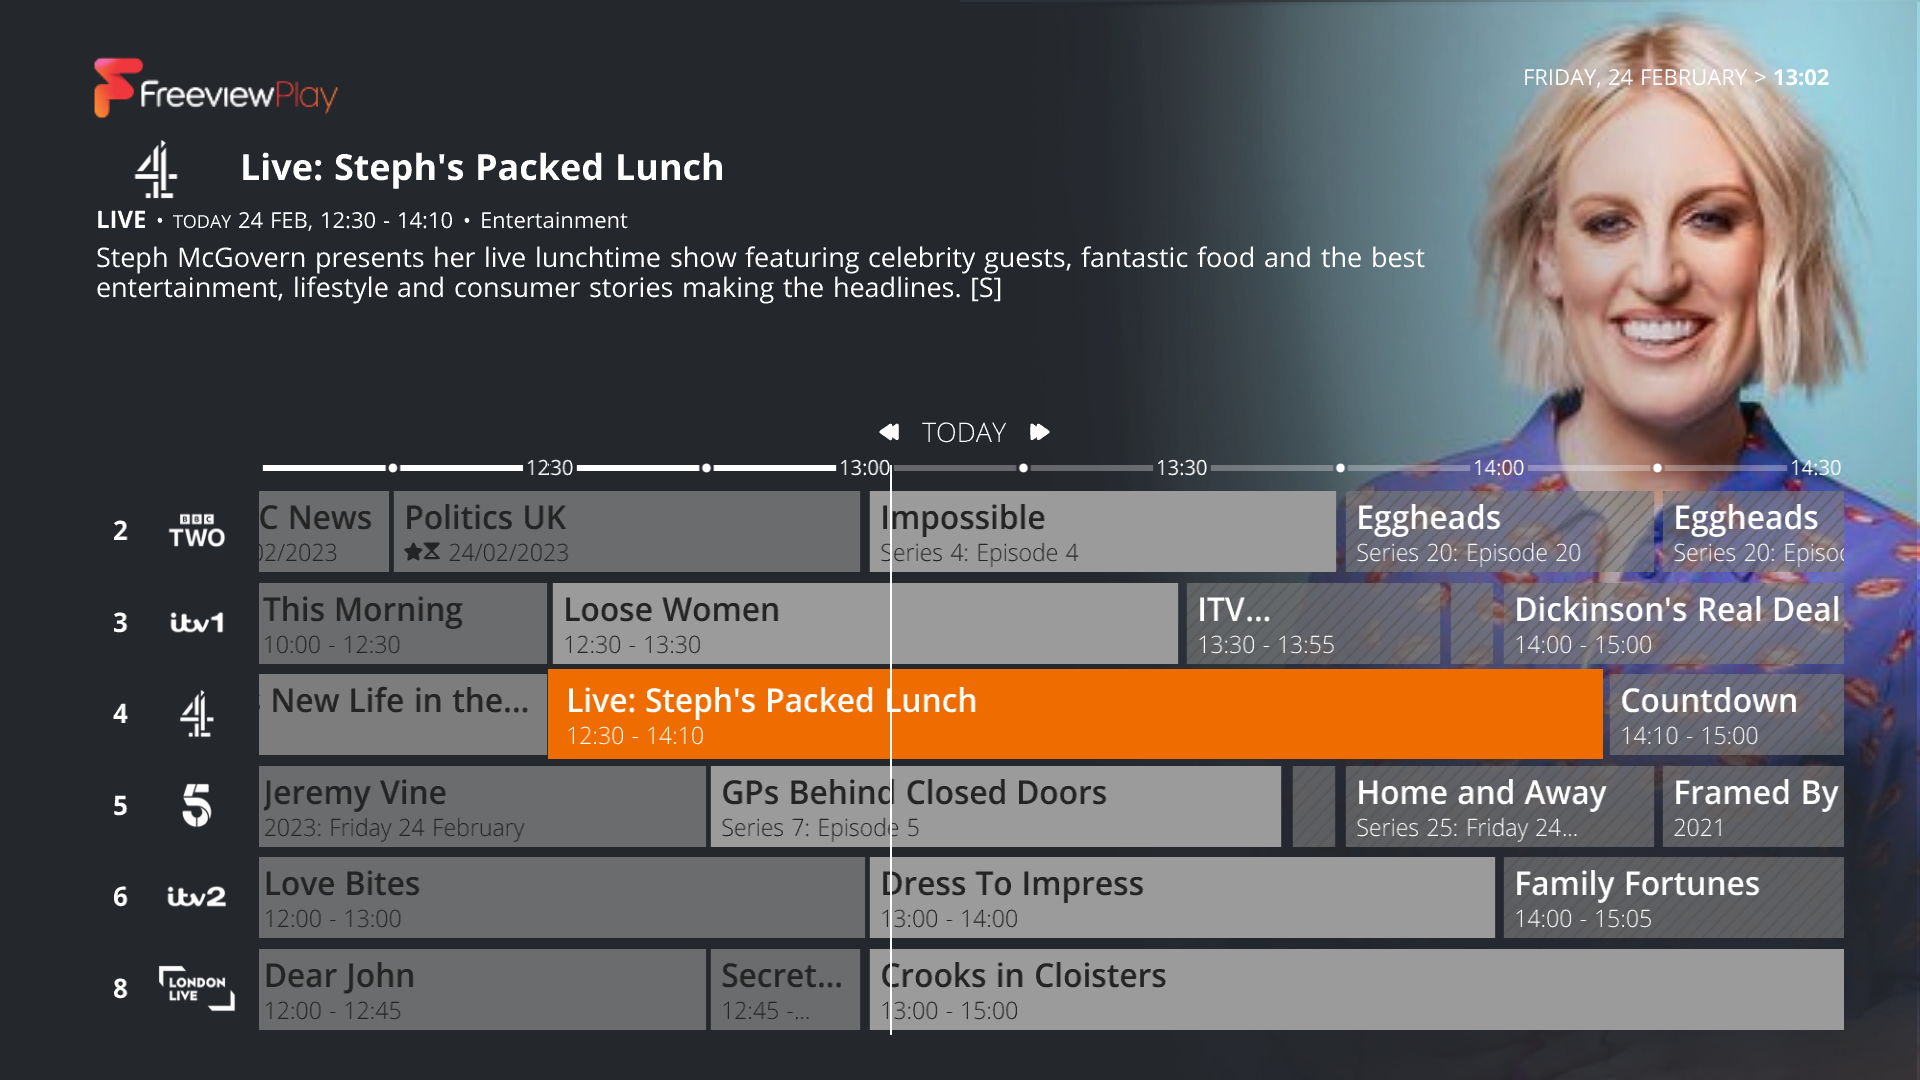 EPG_-_Live_Steph_s_Packed_Lunch.png